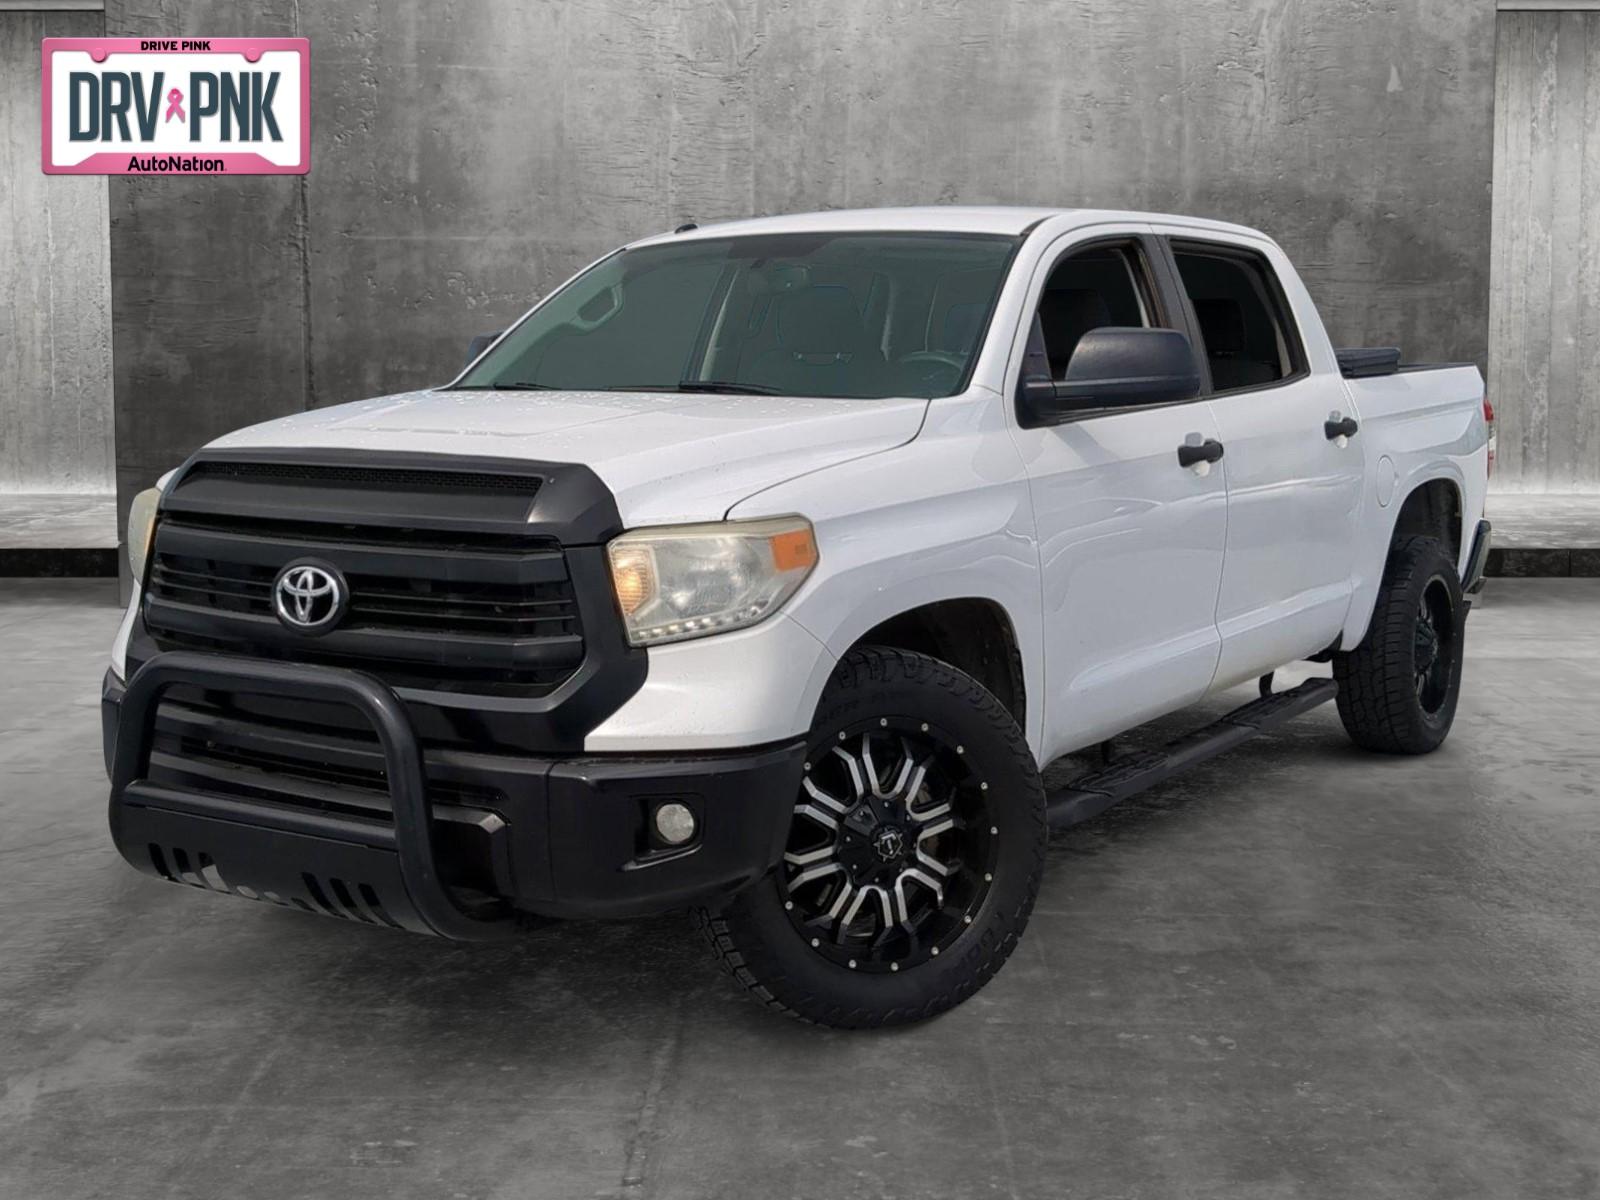 2014 Toyota Tundra 4WD Truck Vehicle Photo in Ft. Myers, FL 33907